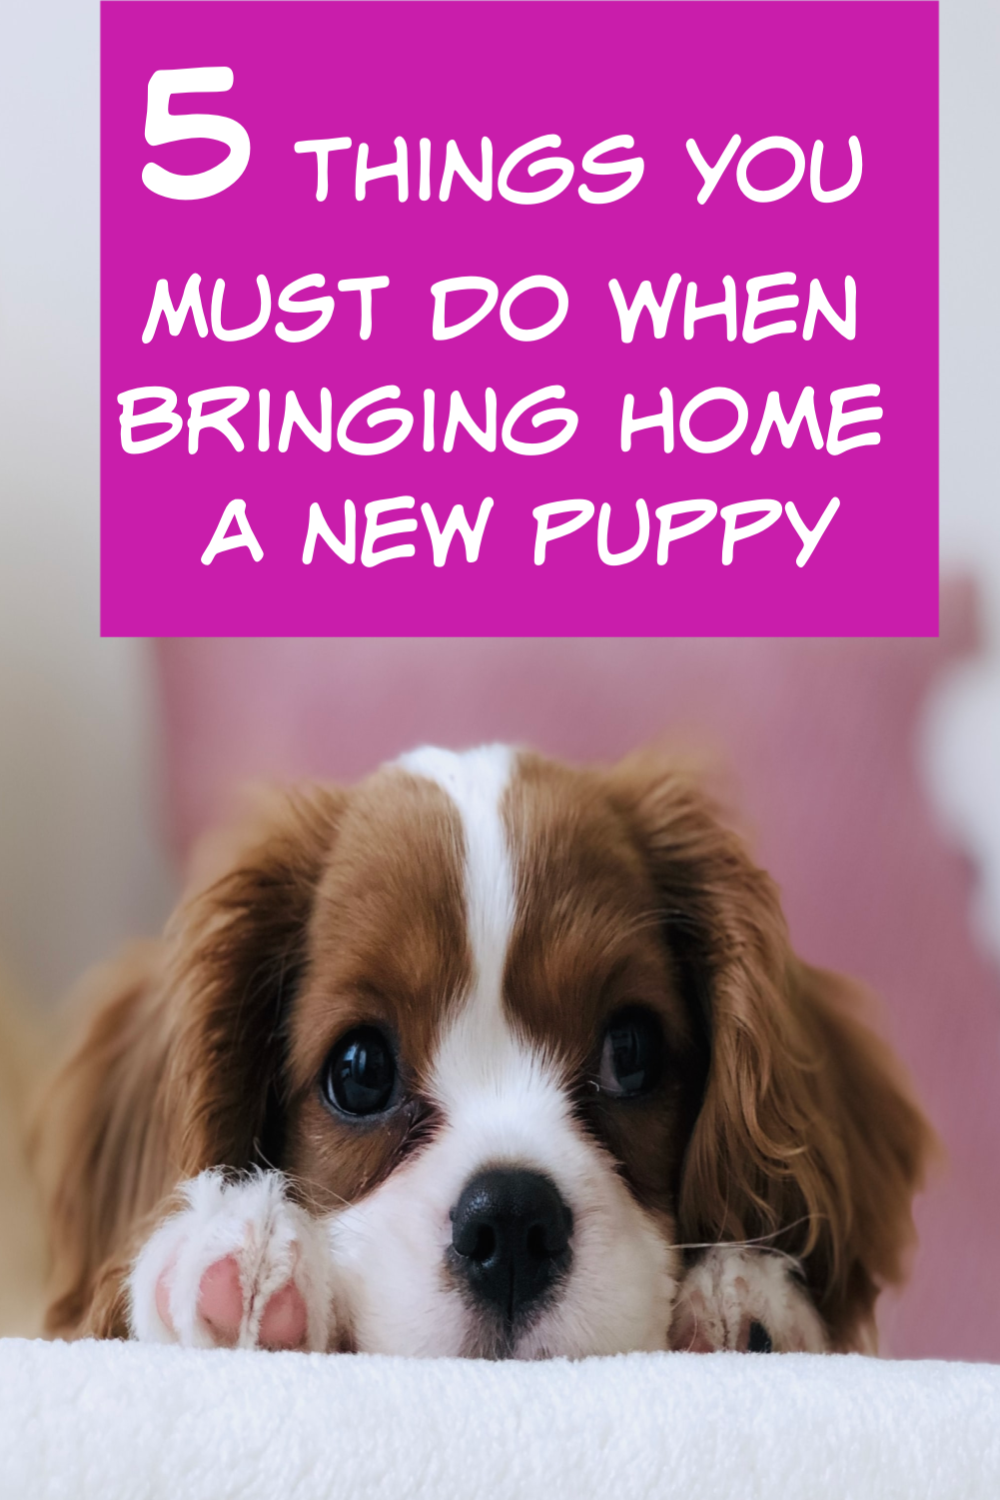 The 5 Things You MUST Do When Bringing Home a New Puppy